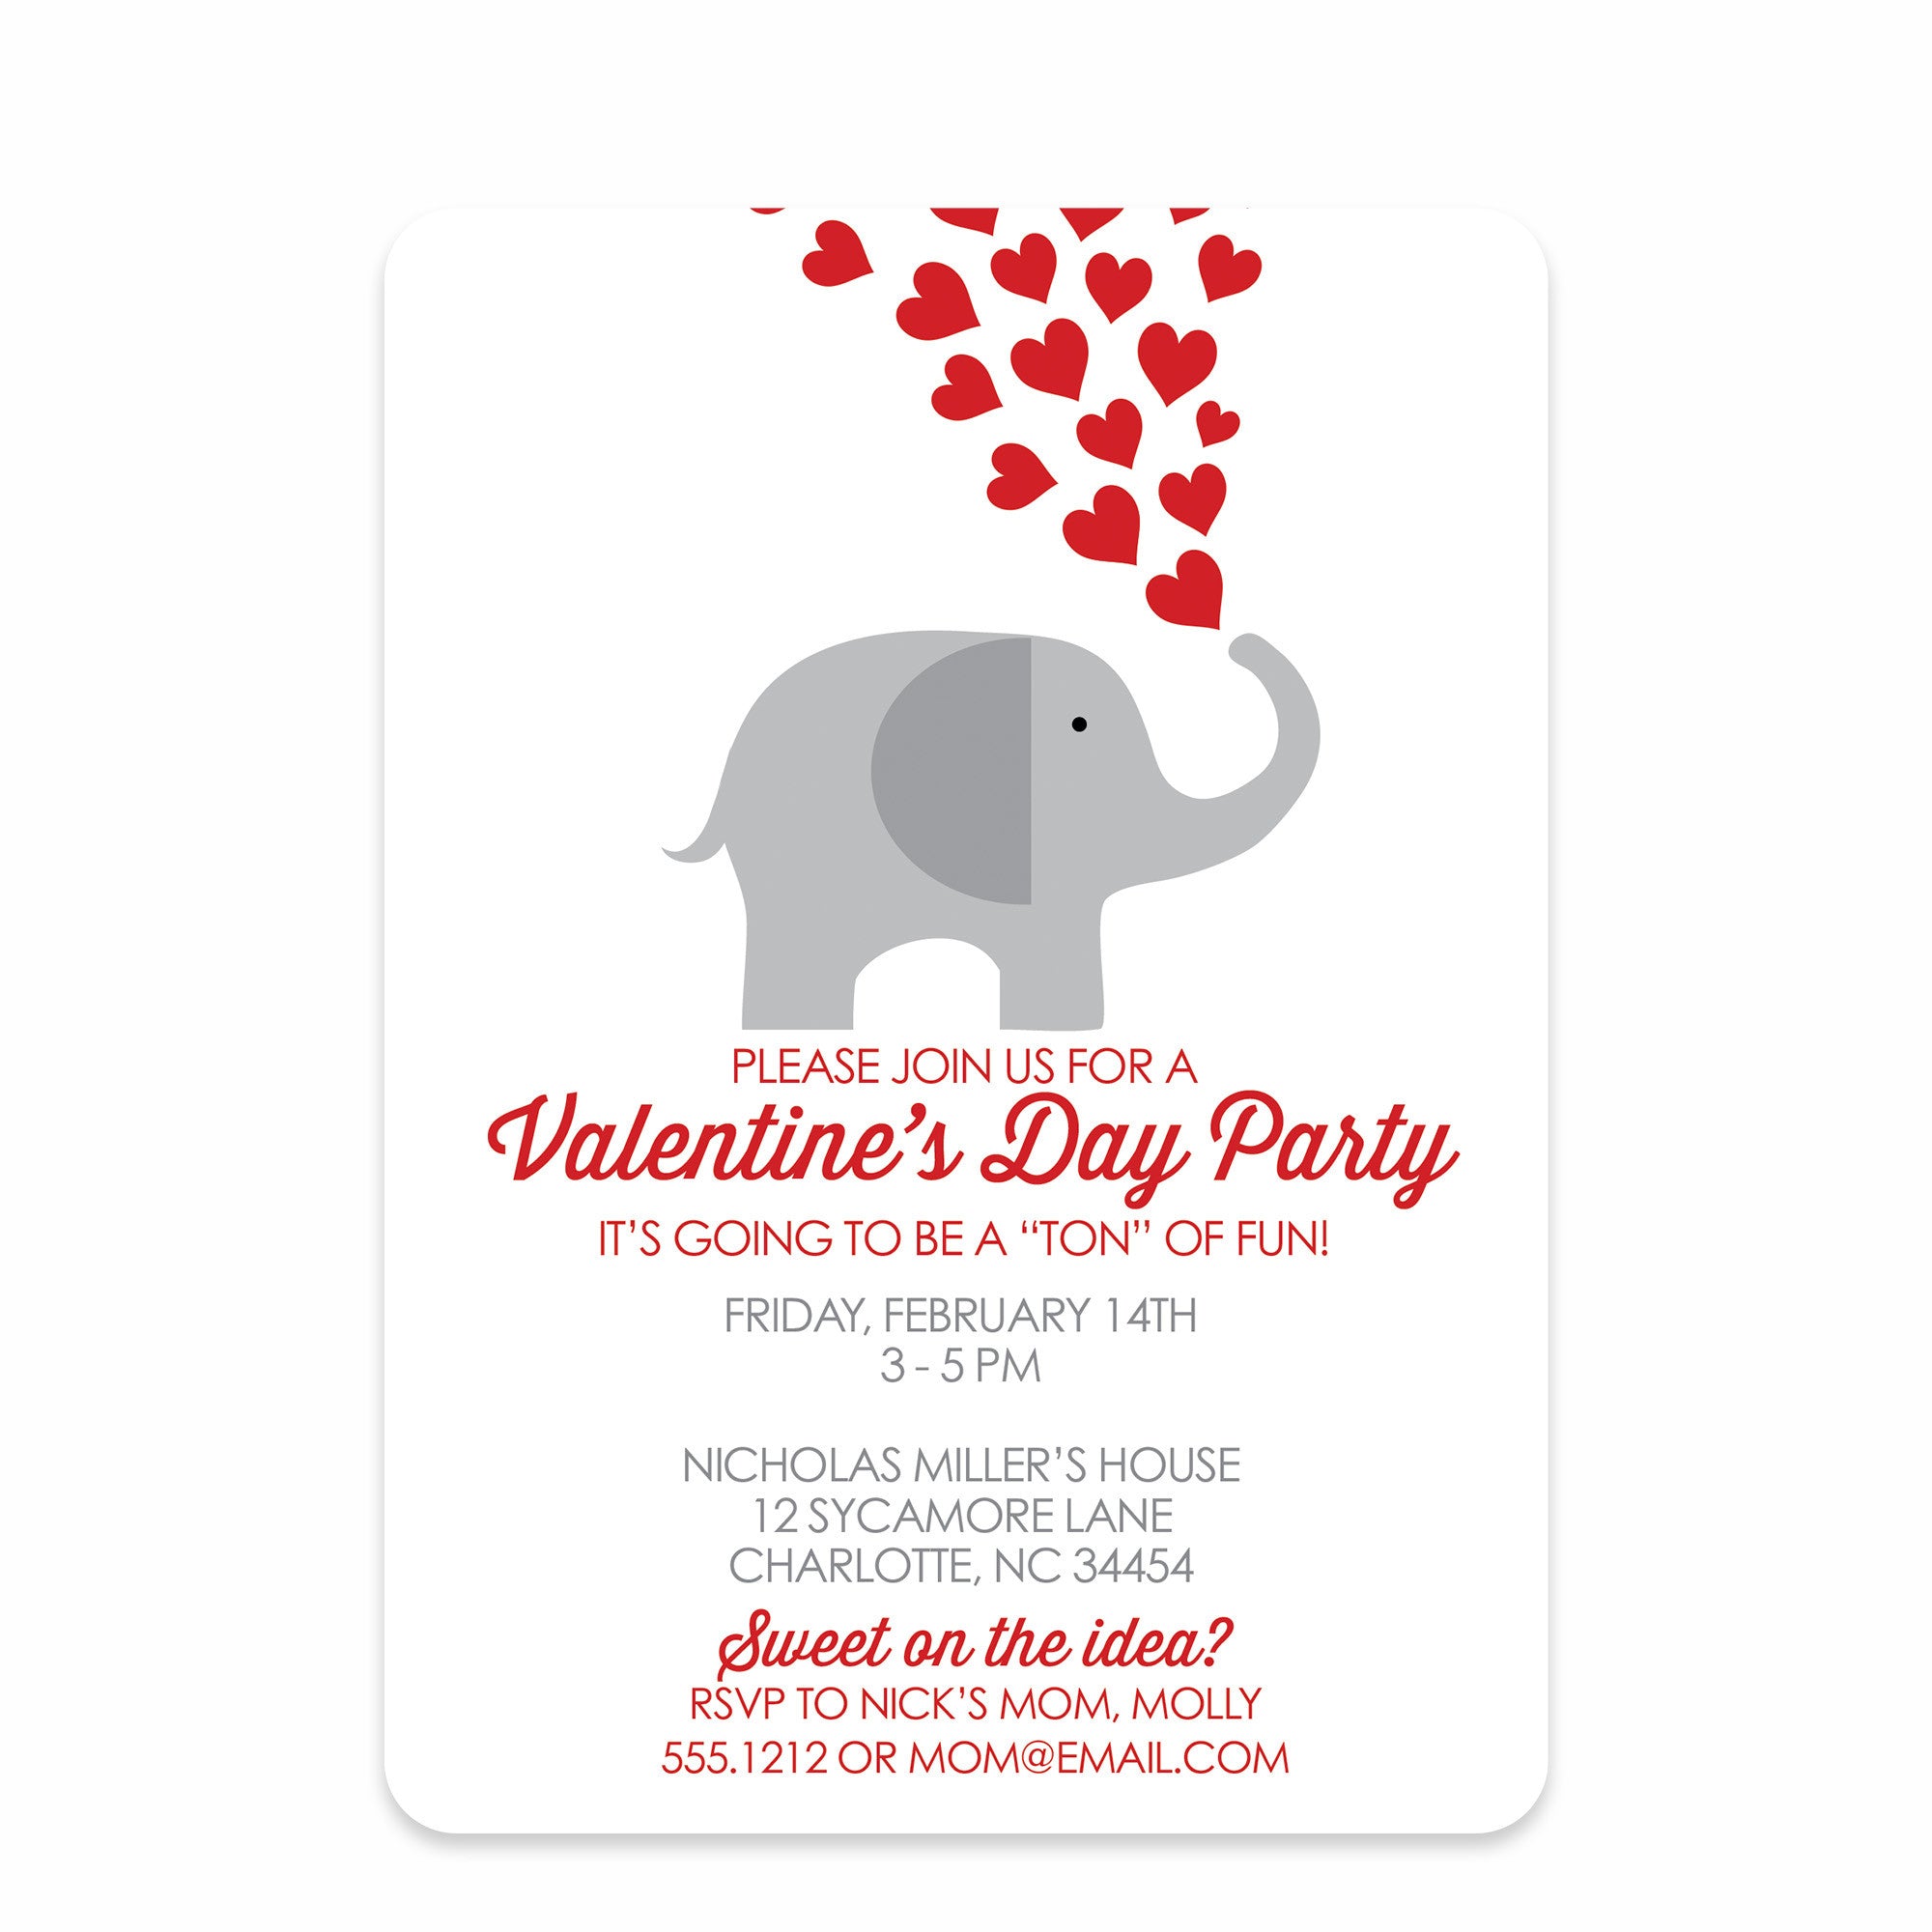 Valentine's Day Party Invitation, Elephant with Red Hearts, Printed on Heavy Cardstock, from Pipsy.com, front